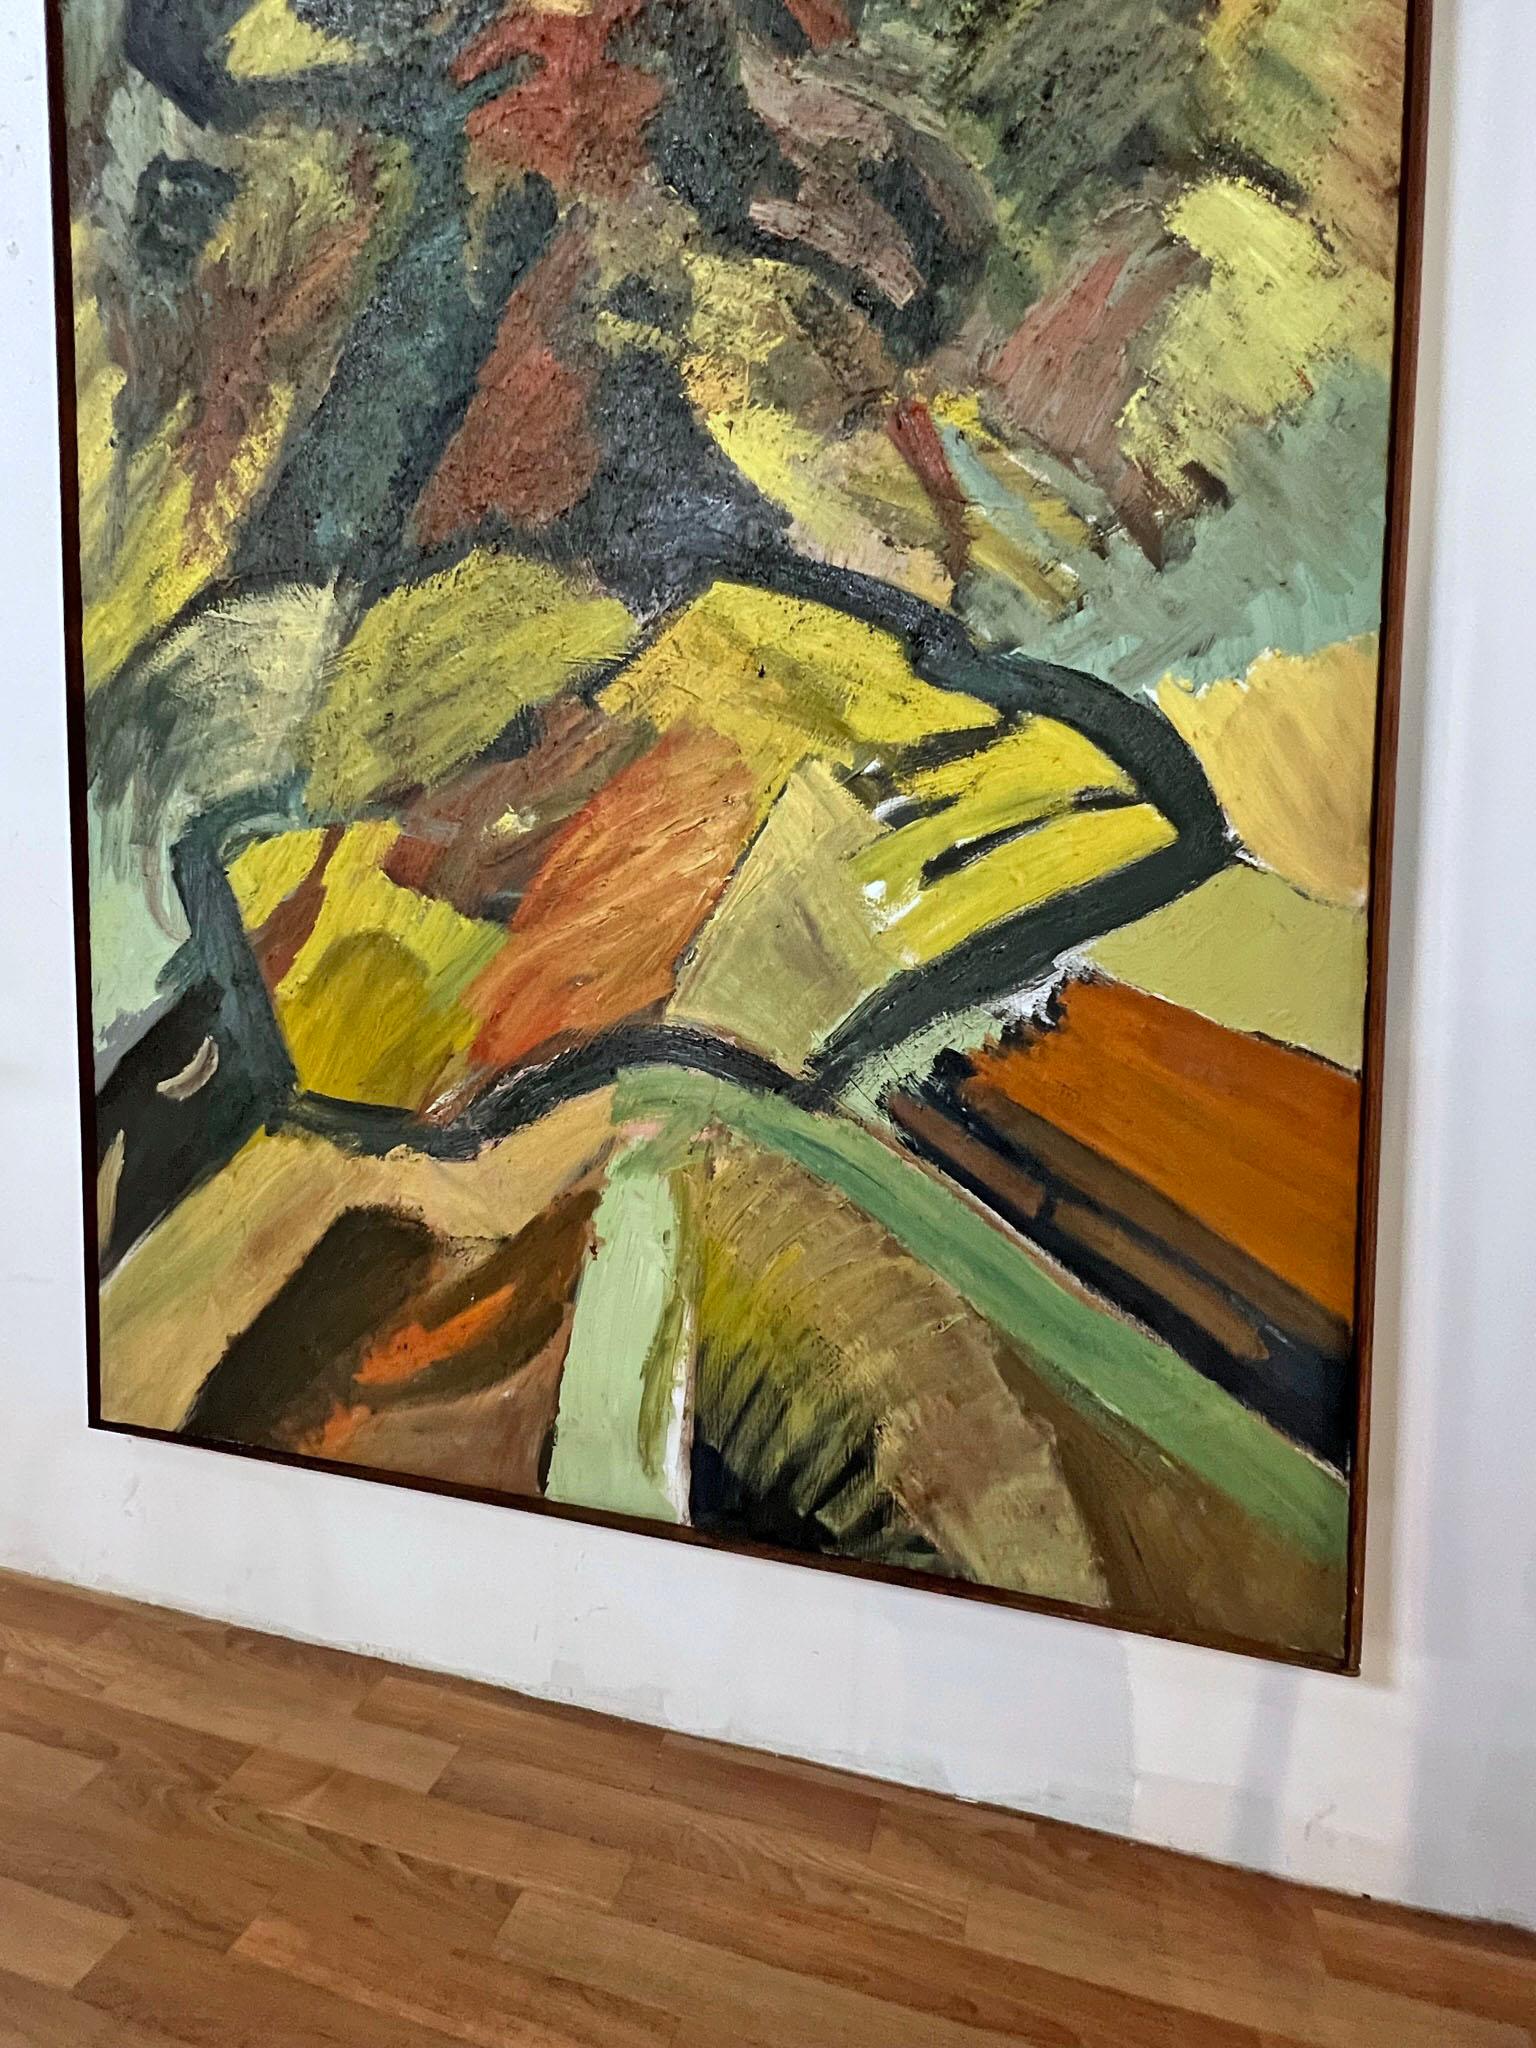 Mid-Century Modern Abstract Expressionist Painting by Harvey Simons, d. 1963